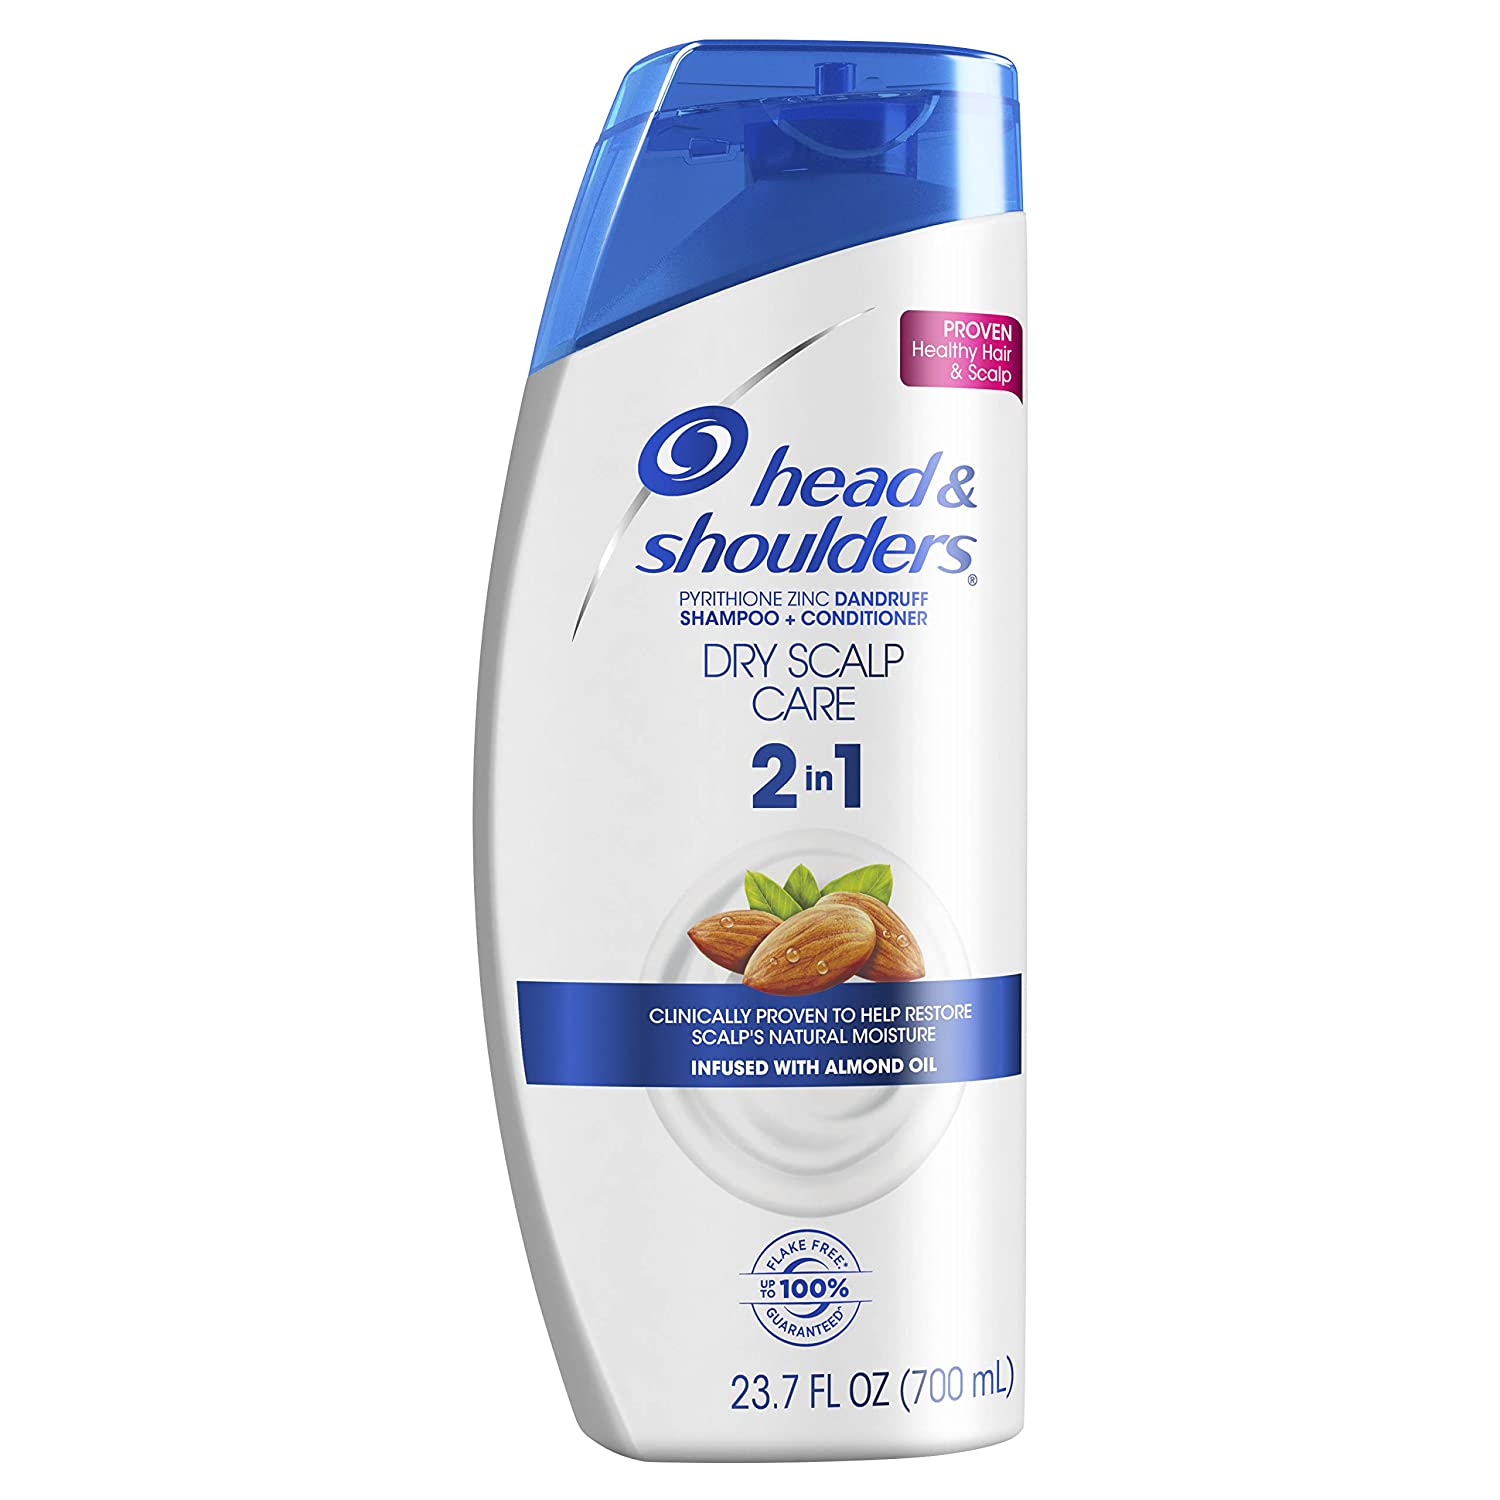 Head & Shoulders Dry Scalp Care Shampoo and Conditioner